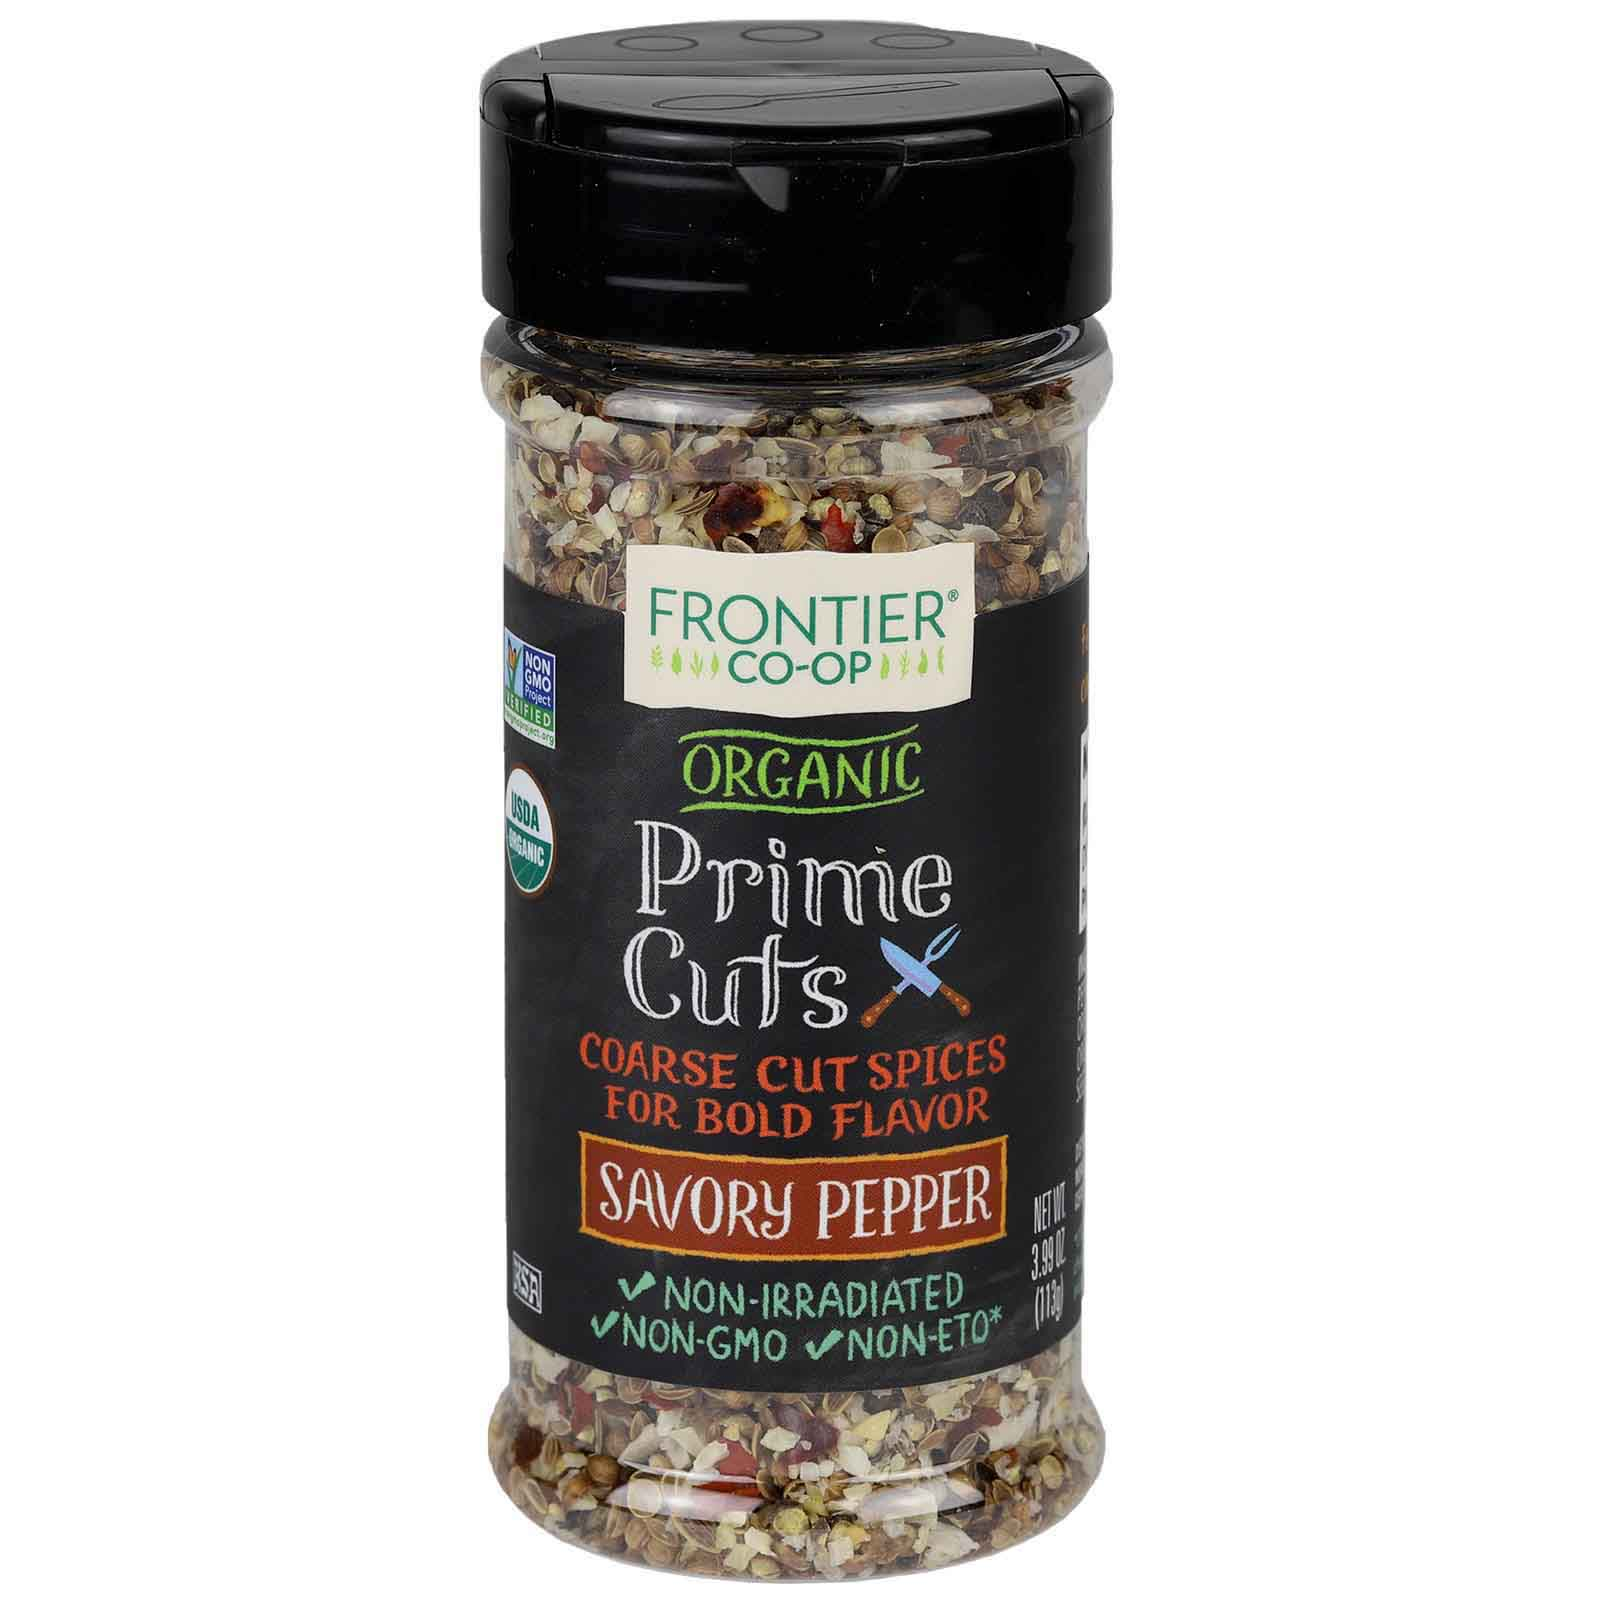 Frontier Co-Op Spices Frontier Co-Op Prime Cuts Savory Pepper 3.99 oz